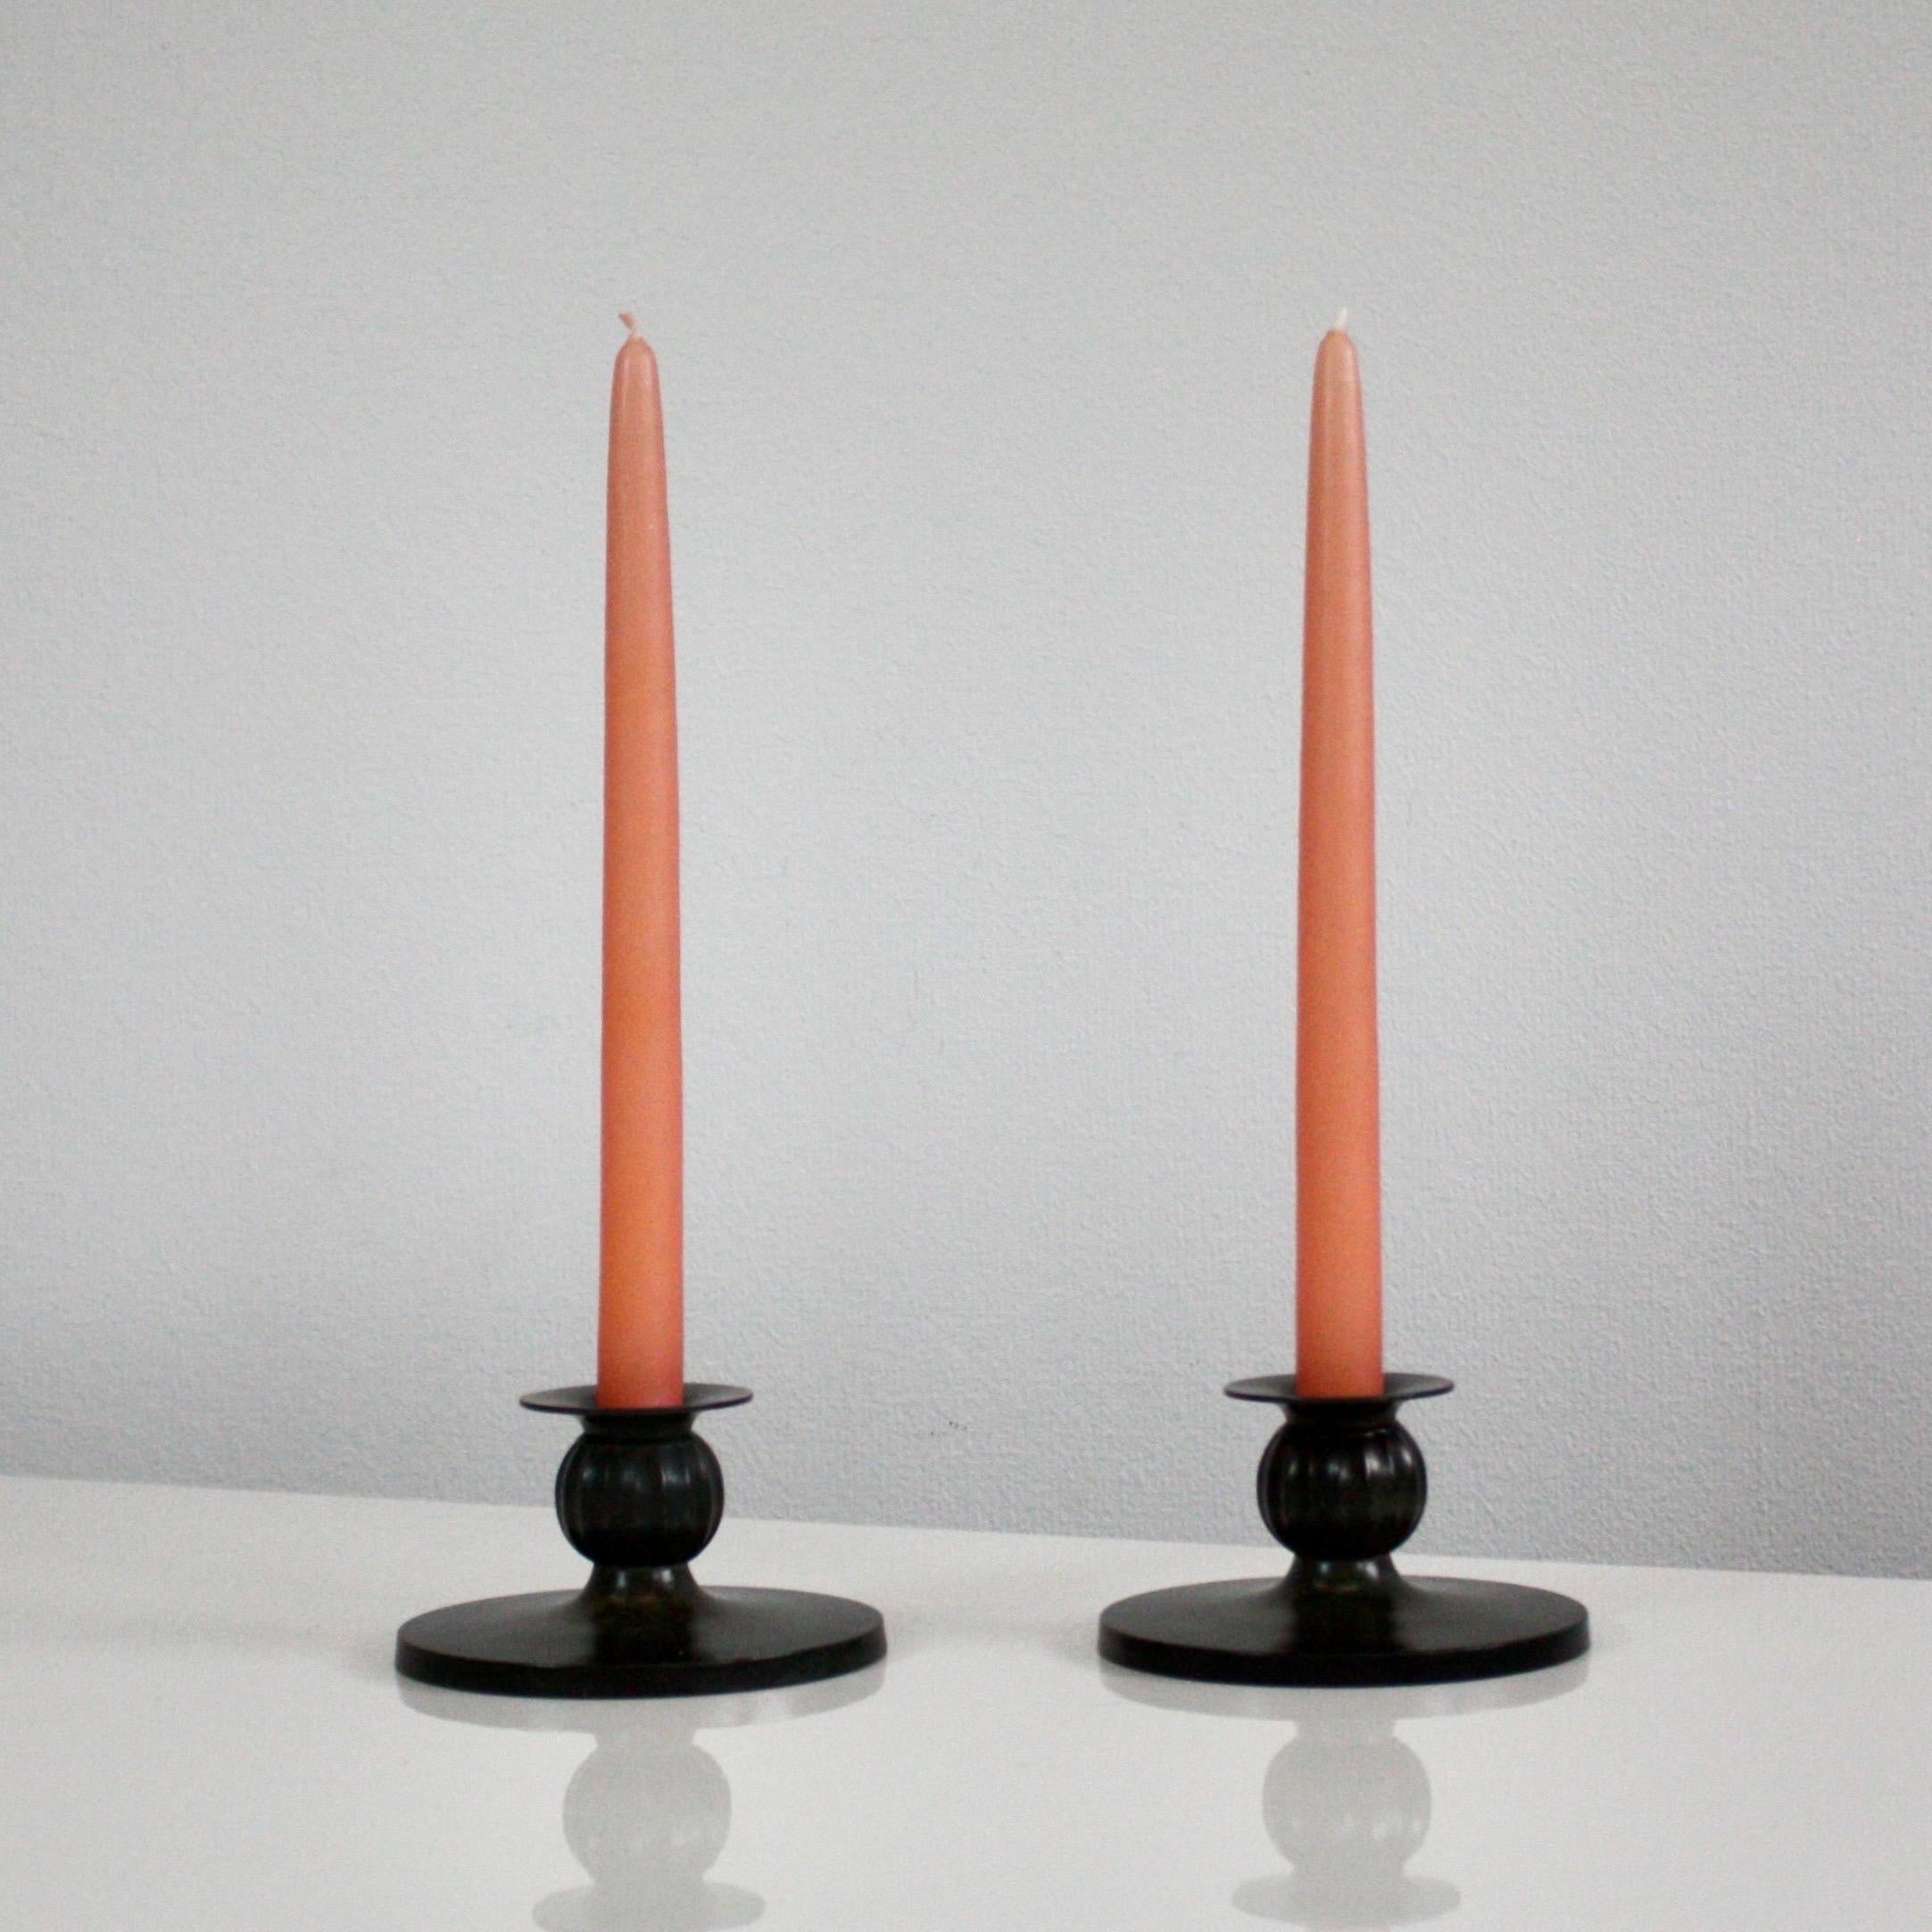 A fine set of candle holders designed by Just Andersen in 1933. 

* A pair of metal candlestick holders
* Designer: Just Andersen
* Manufacturer: Just Andersen
* Style: D1606
* Year: 1933
* Condition: Good vintage condition. Makers mark intact.  Few